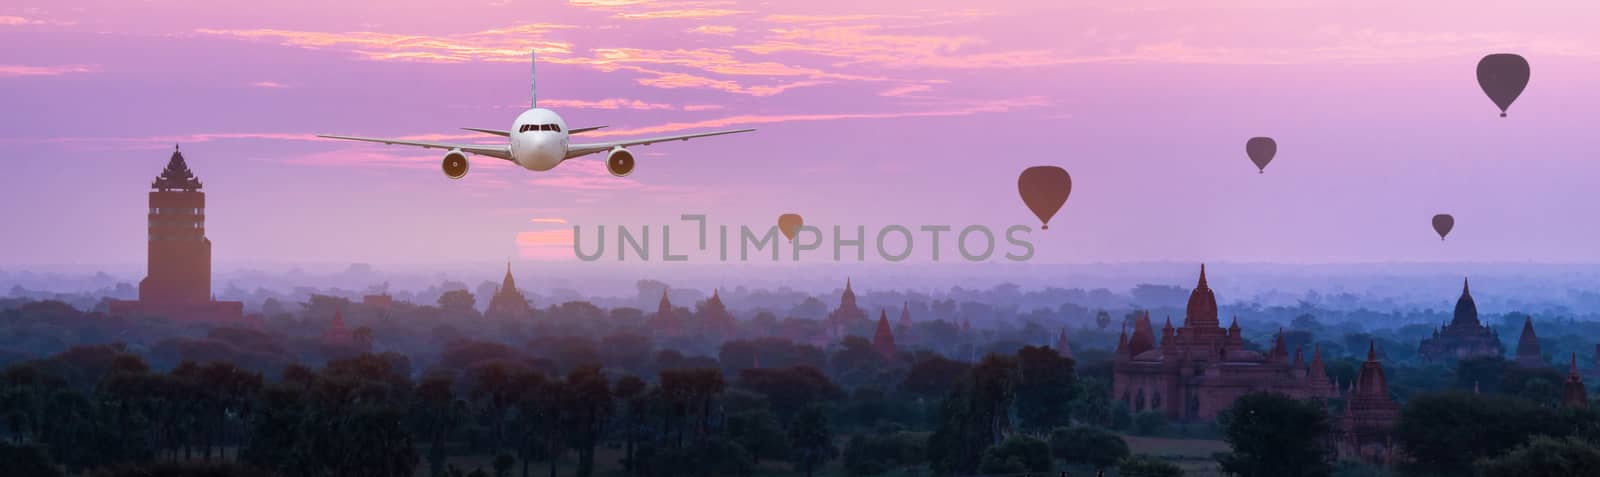 Front of real plane aircraft, on Pagoda Sunset in Bagan,Myanmar  by Surasak